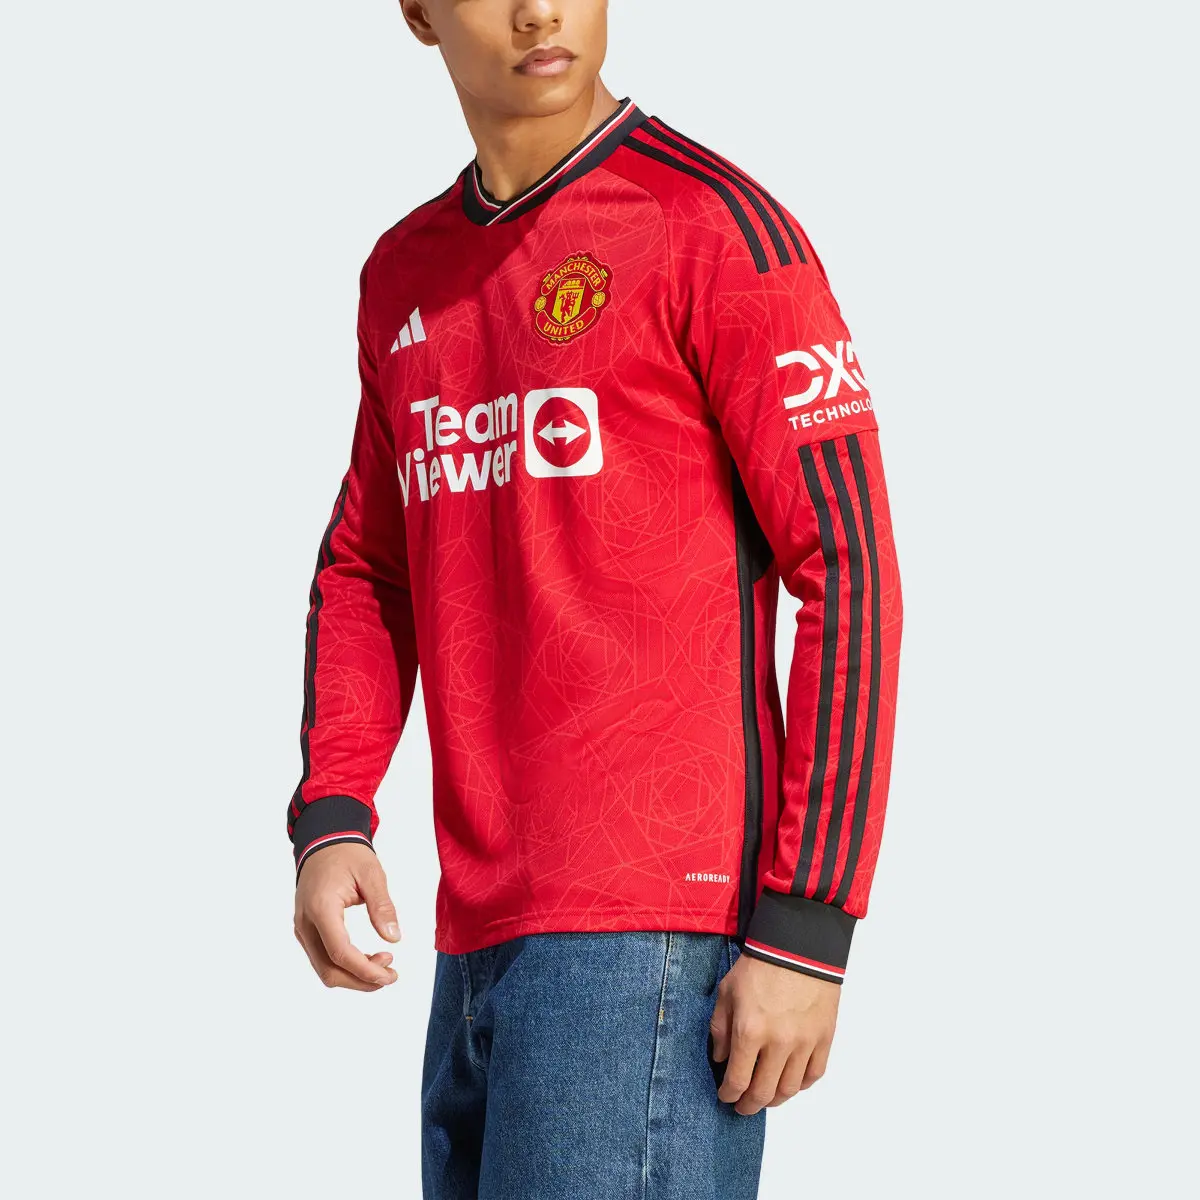 Adidas Maillot manches longues Domicile Manchester United 23/24. 1